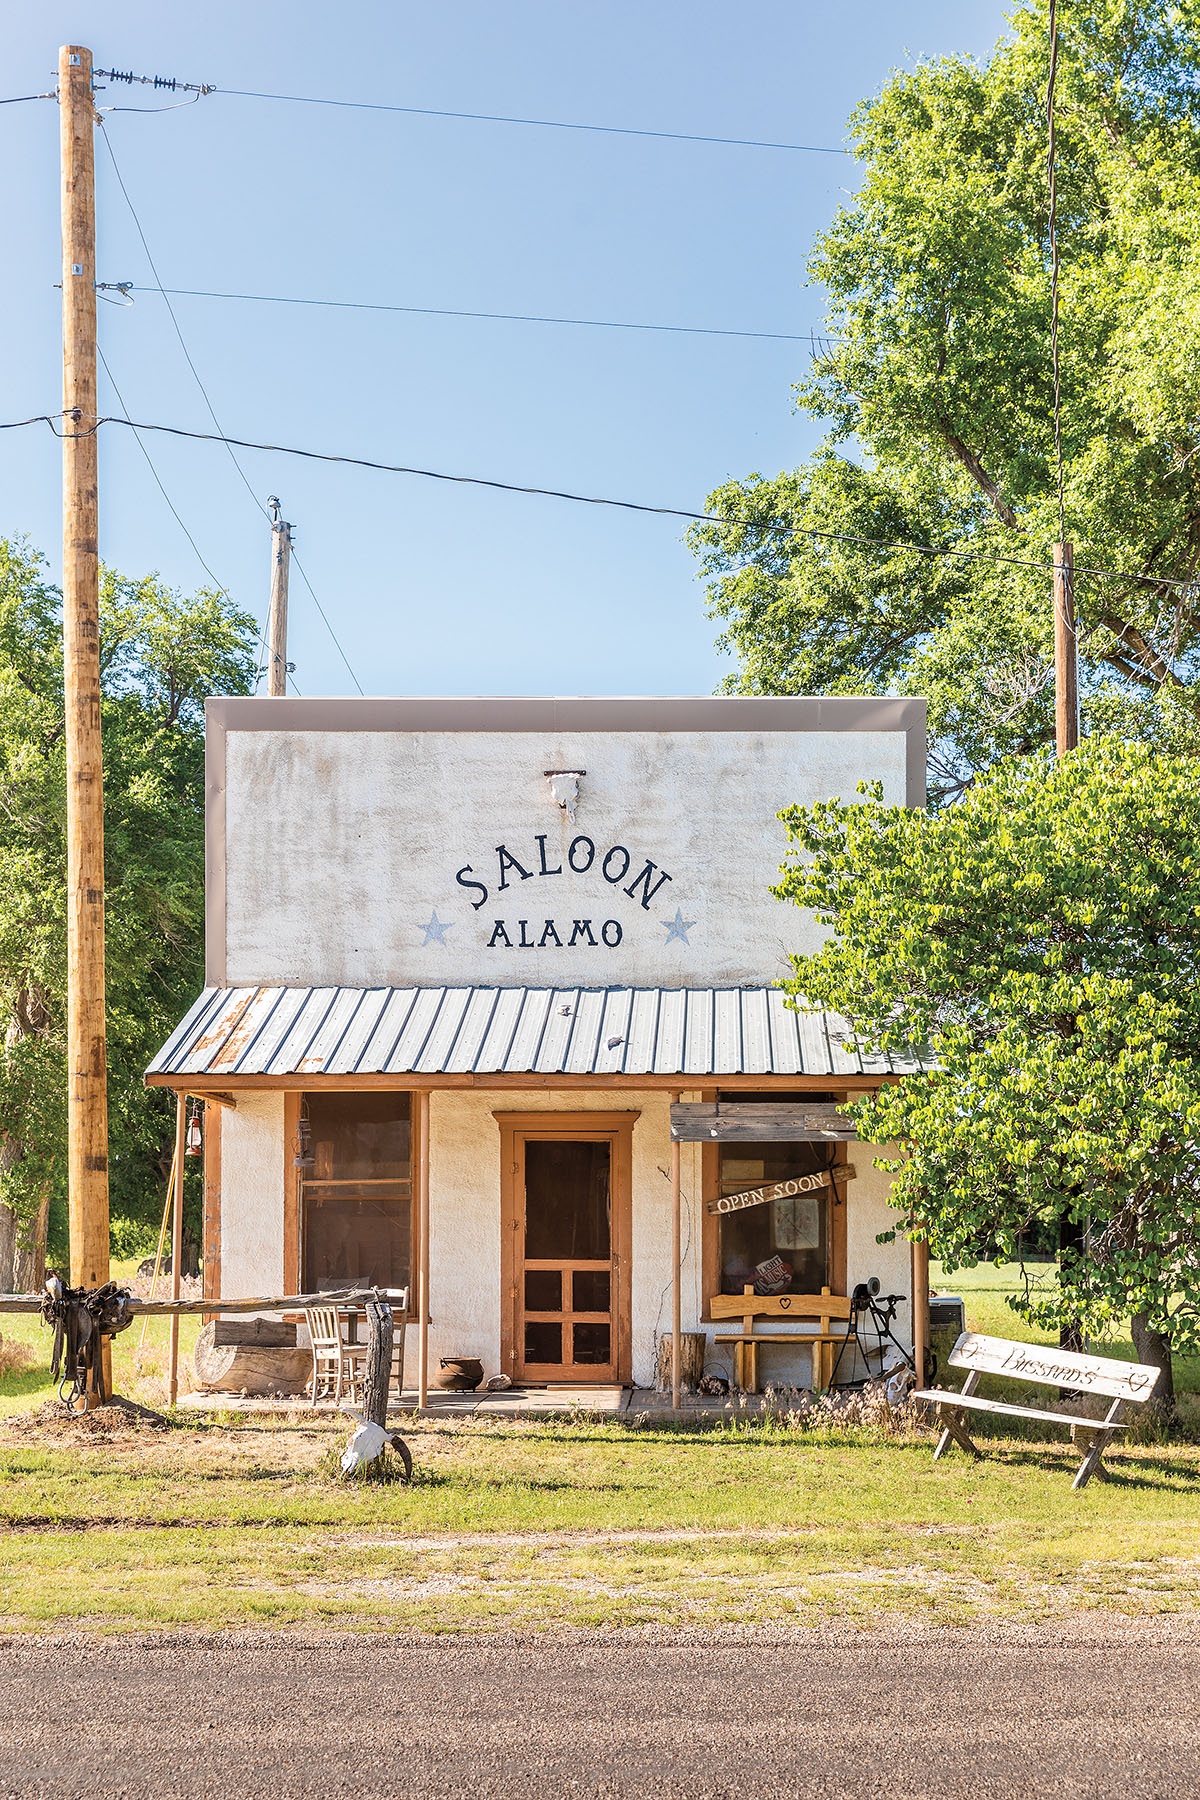 A white painted building next to a telephone pole with a sign reading "Saloon Alamo"